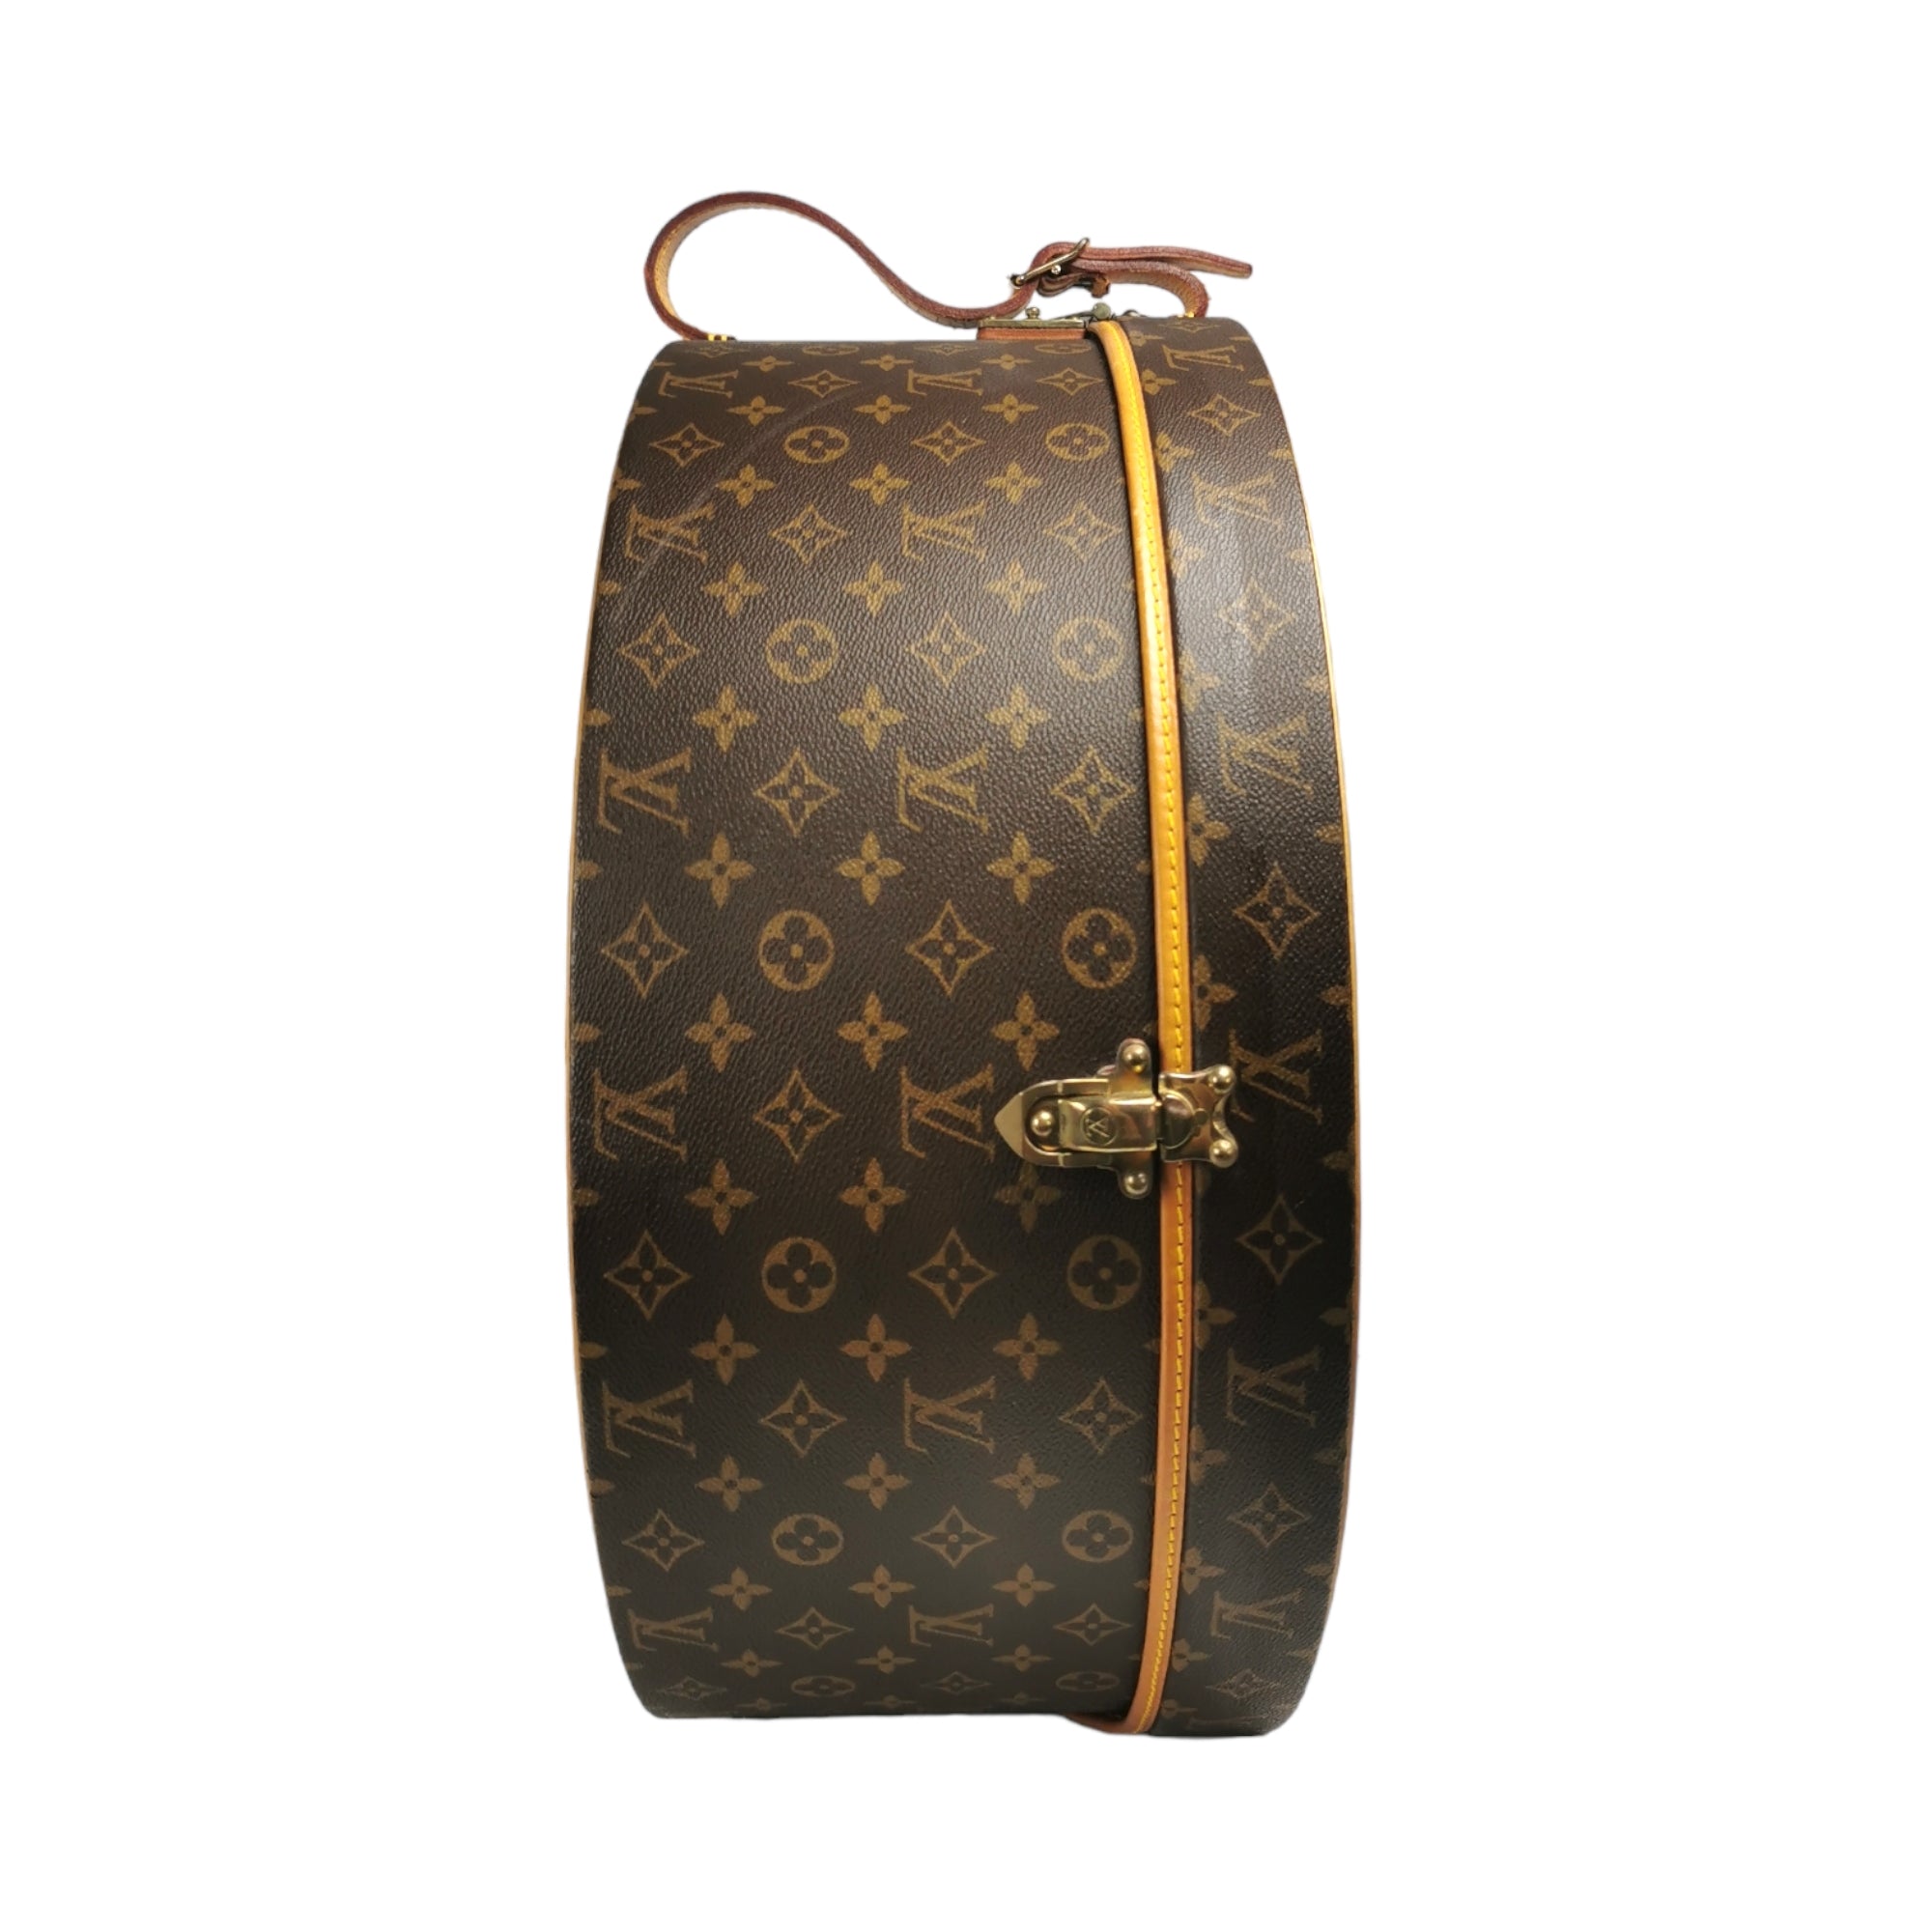 Louis Vuitton hat box - Baggage Collection